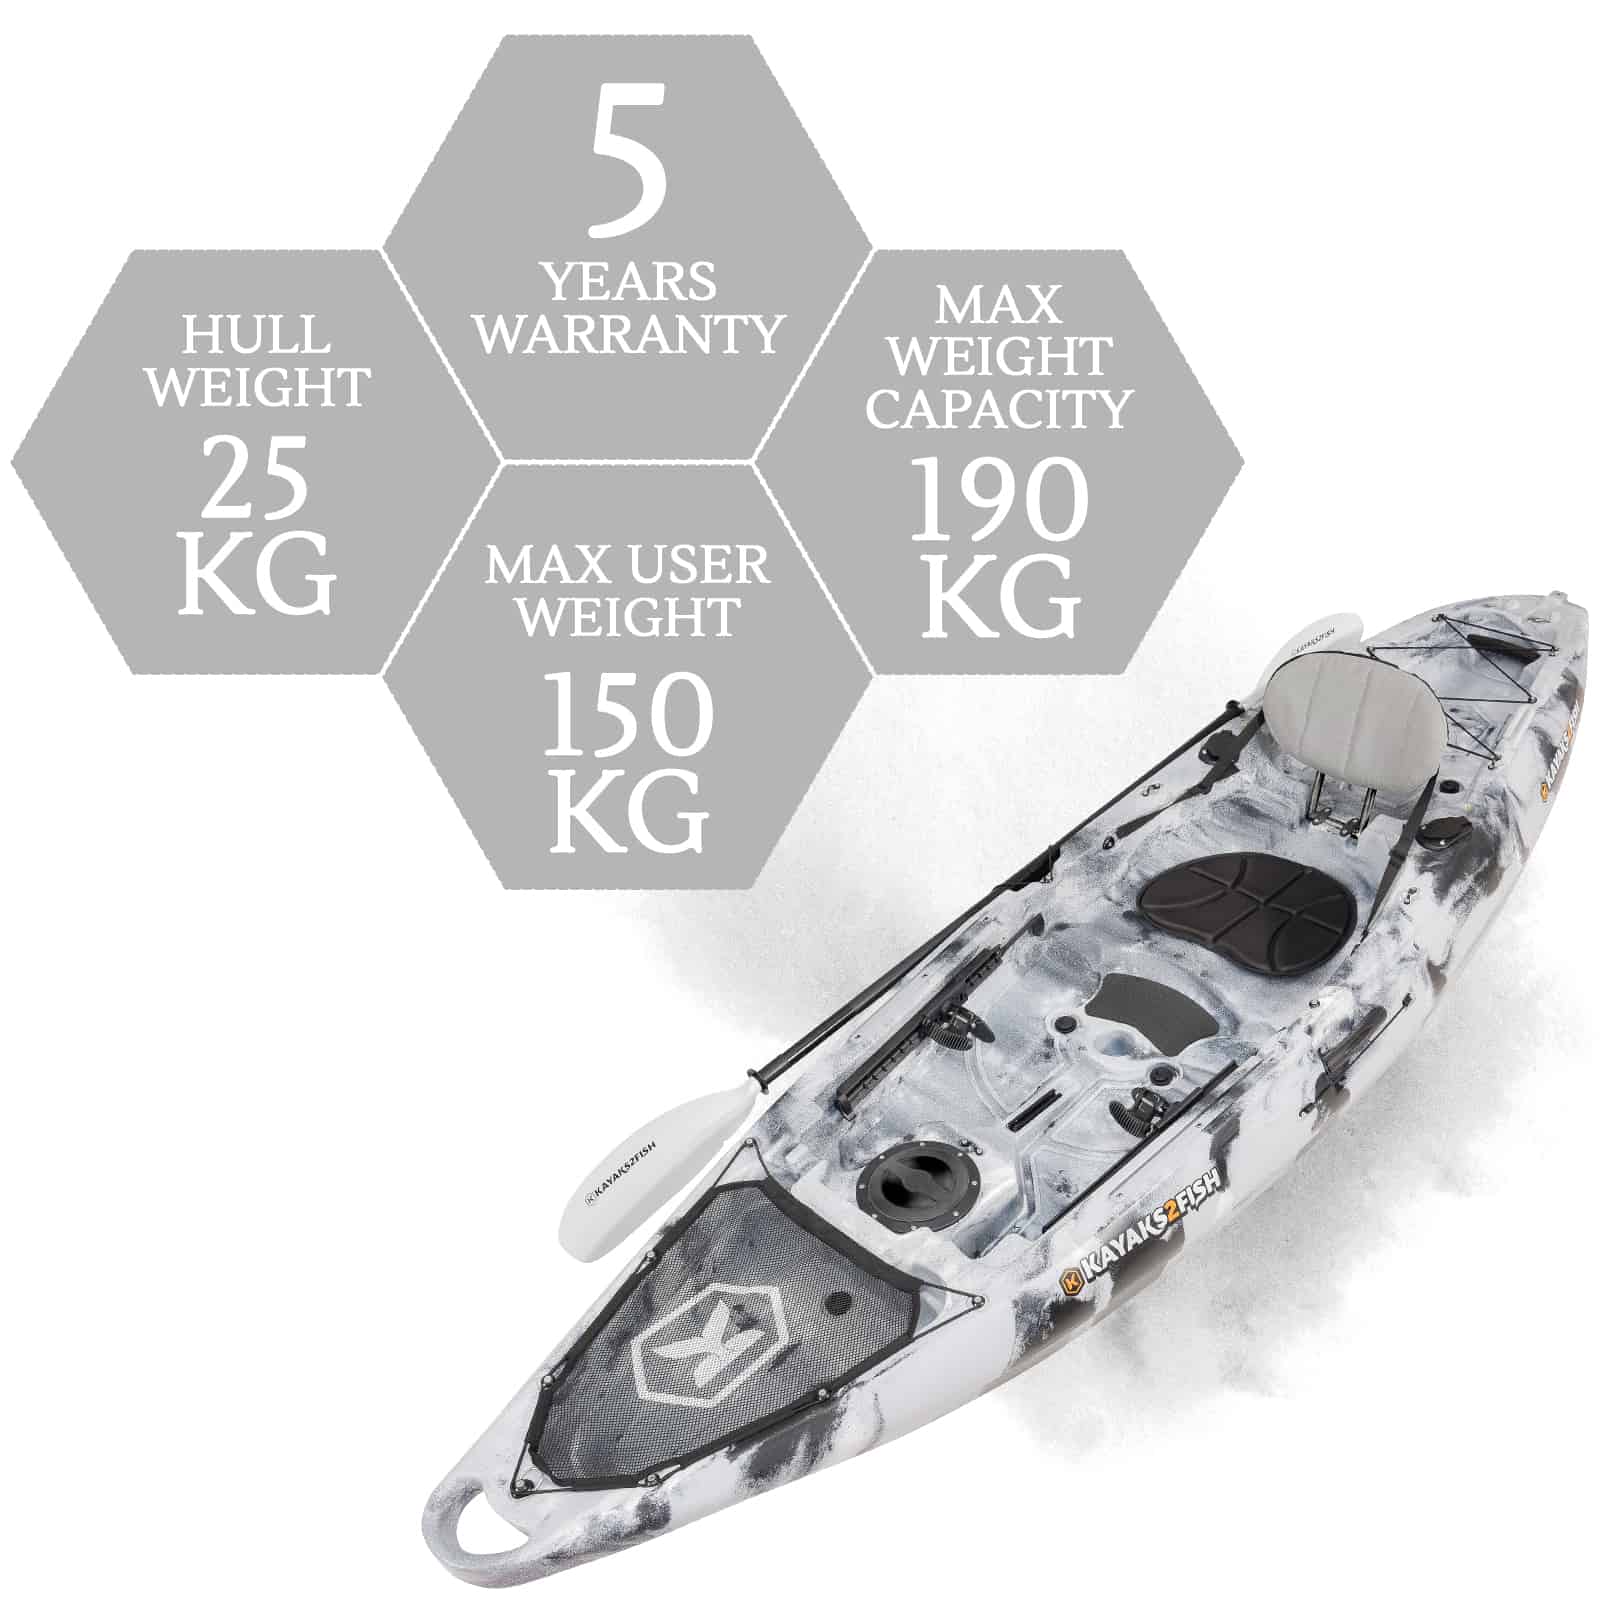 NG-1-1-GREYCAMO specifications